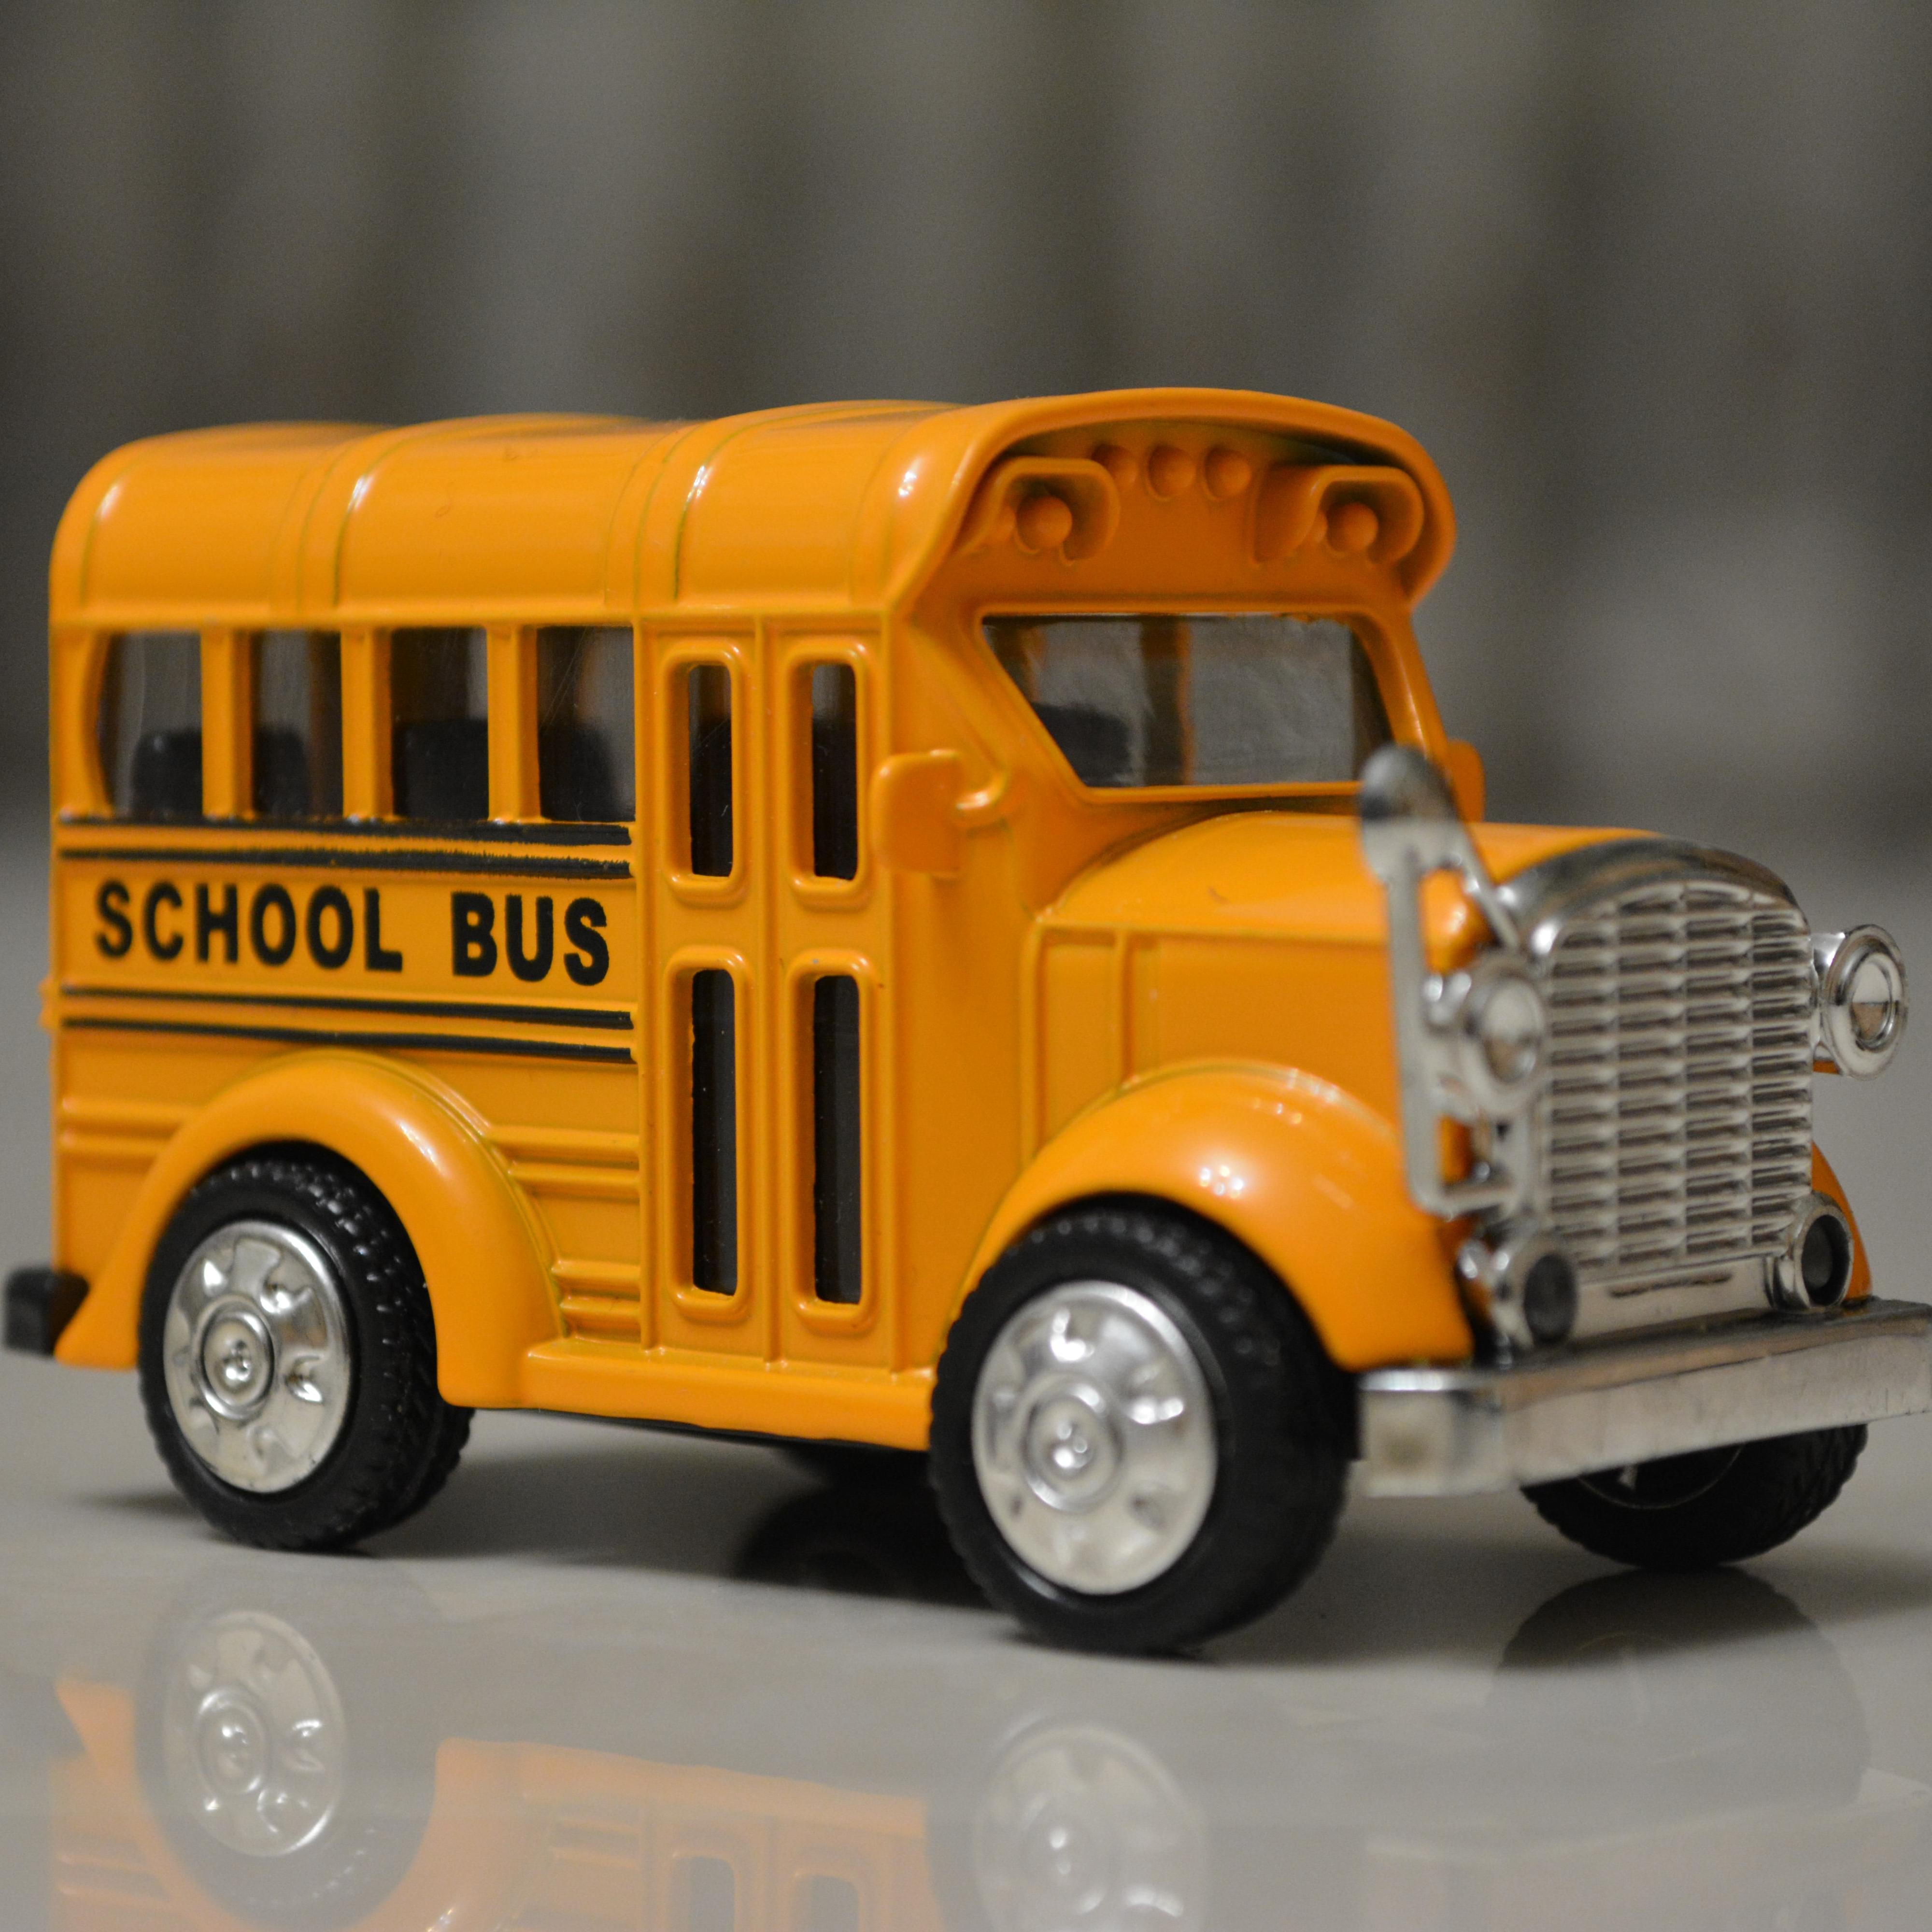 A photo of a toy school bus.